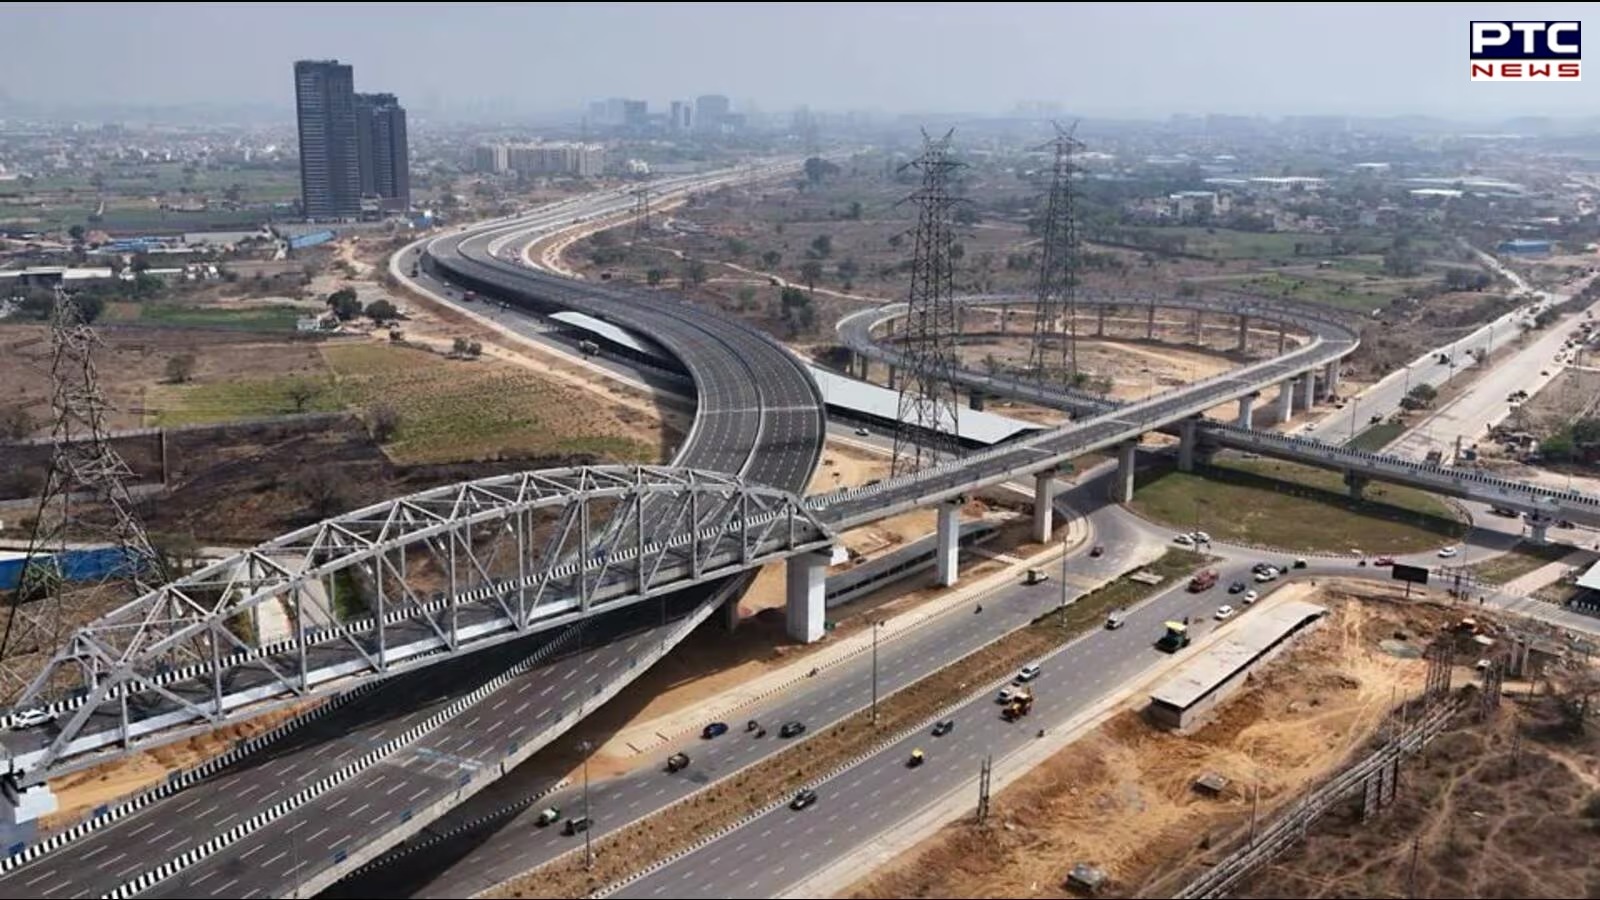 ALERT! NHAI hikes toll prices for Delhi-Gurgaon Expressway, Sohna elevated road; check deets